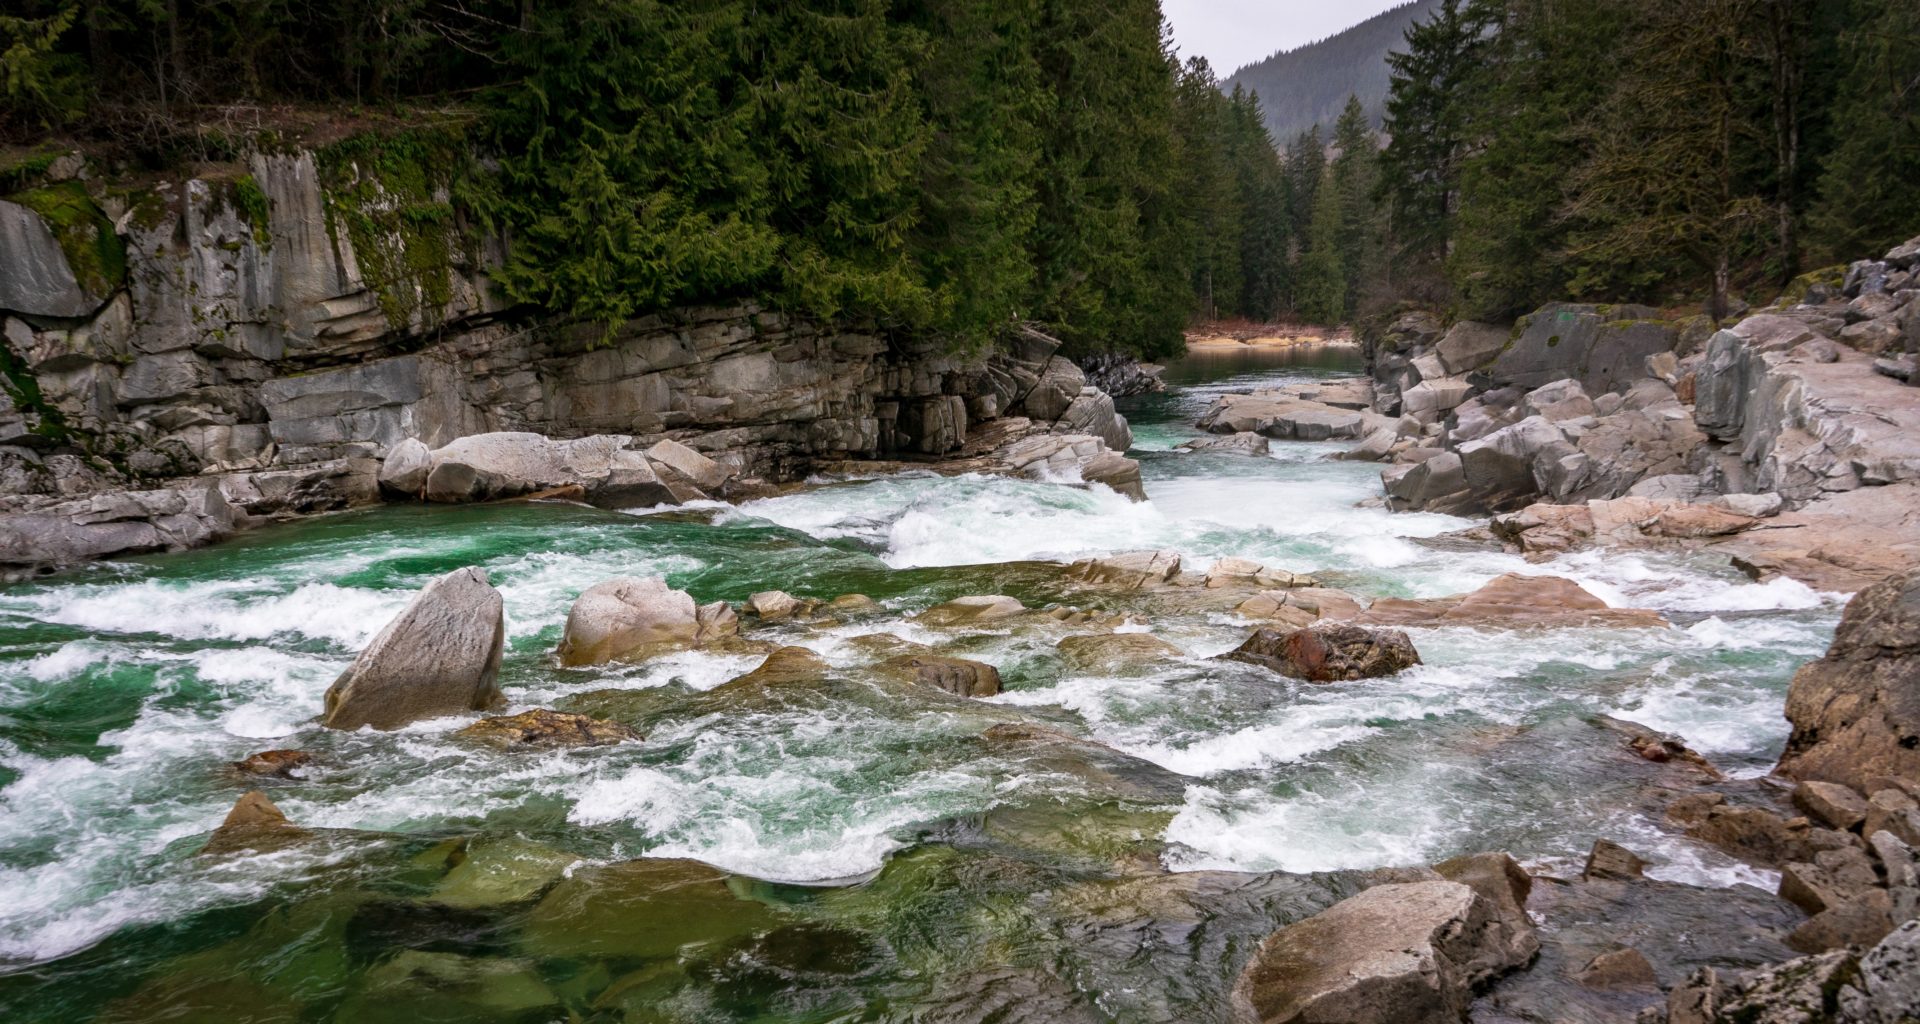 Blue-green river flowing over rocks. Trees in the background.